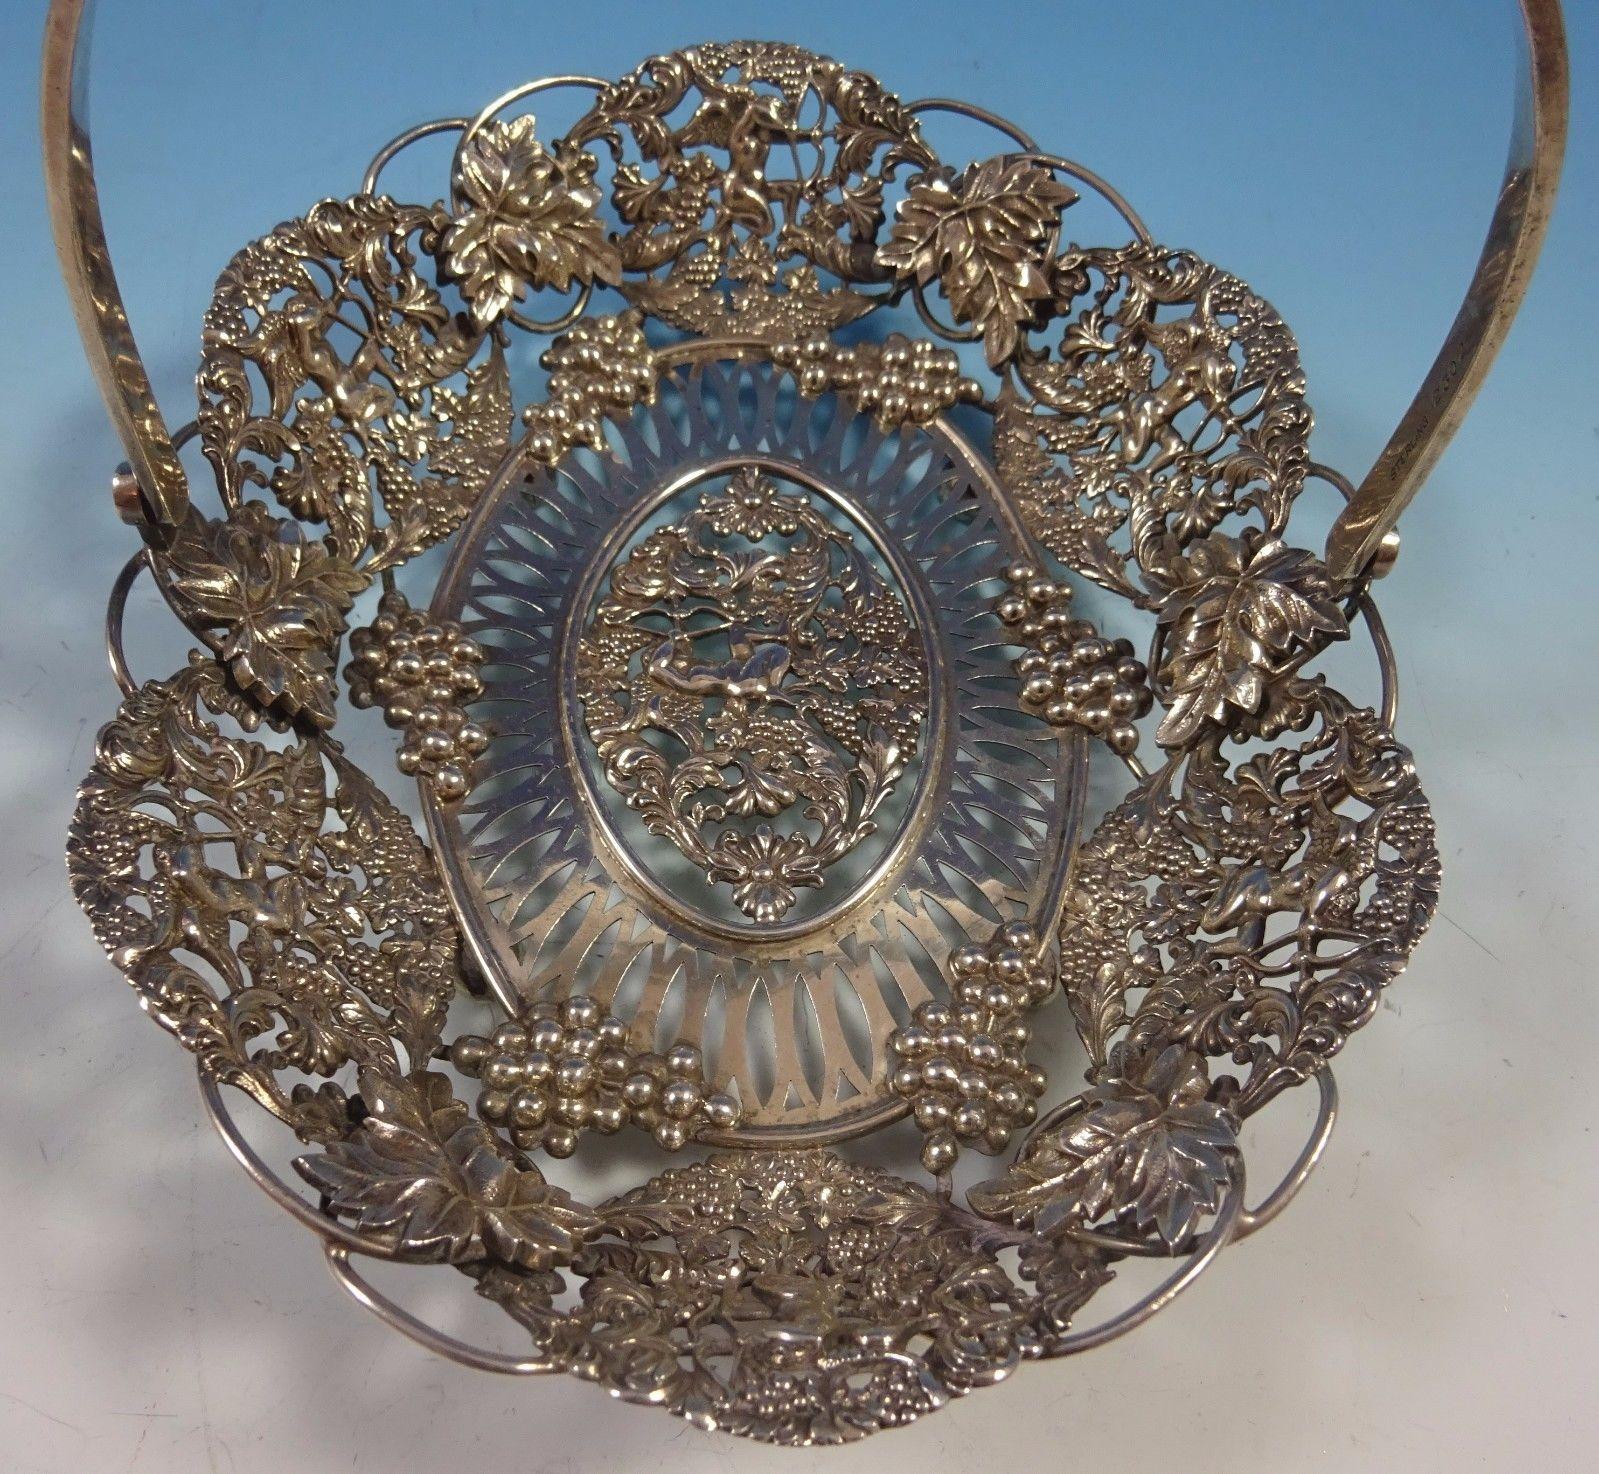 20th Century Theodore Starr Sterling Silver Basket with Cherubs and Grapes